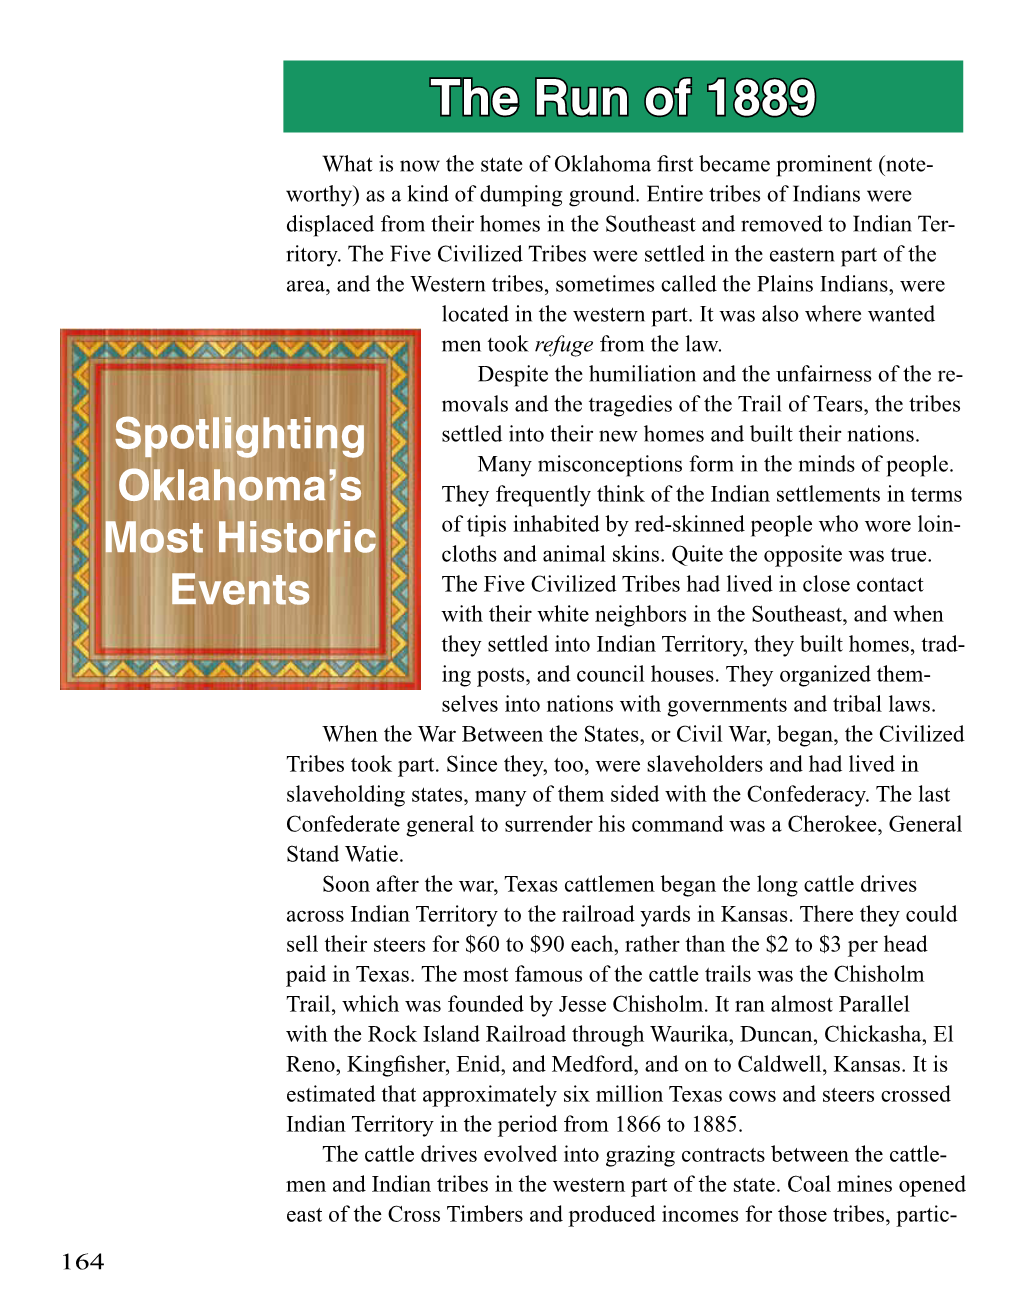 The Run of 1889 What Is Now the State of Oklahoma First Became Prominent (Note- Worthy) As a Kind of Dumping Ground